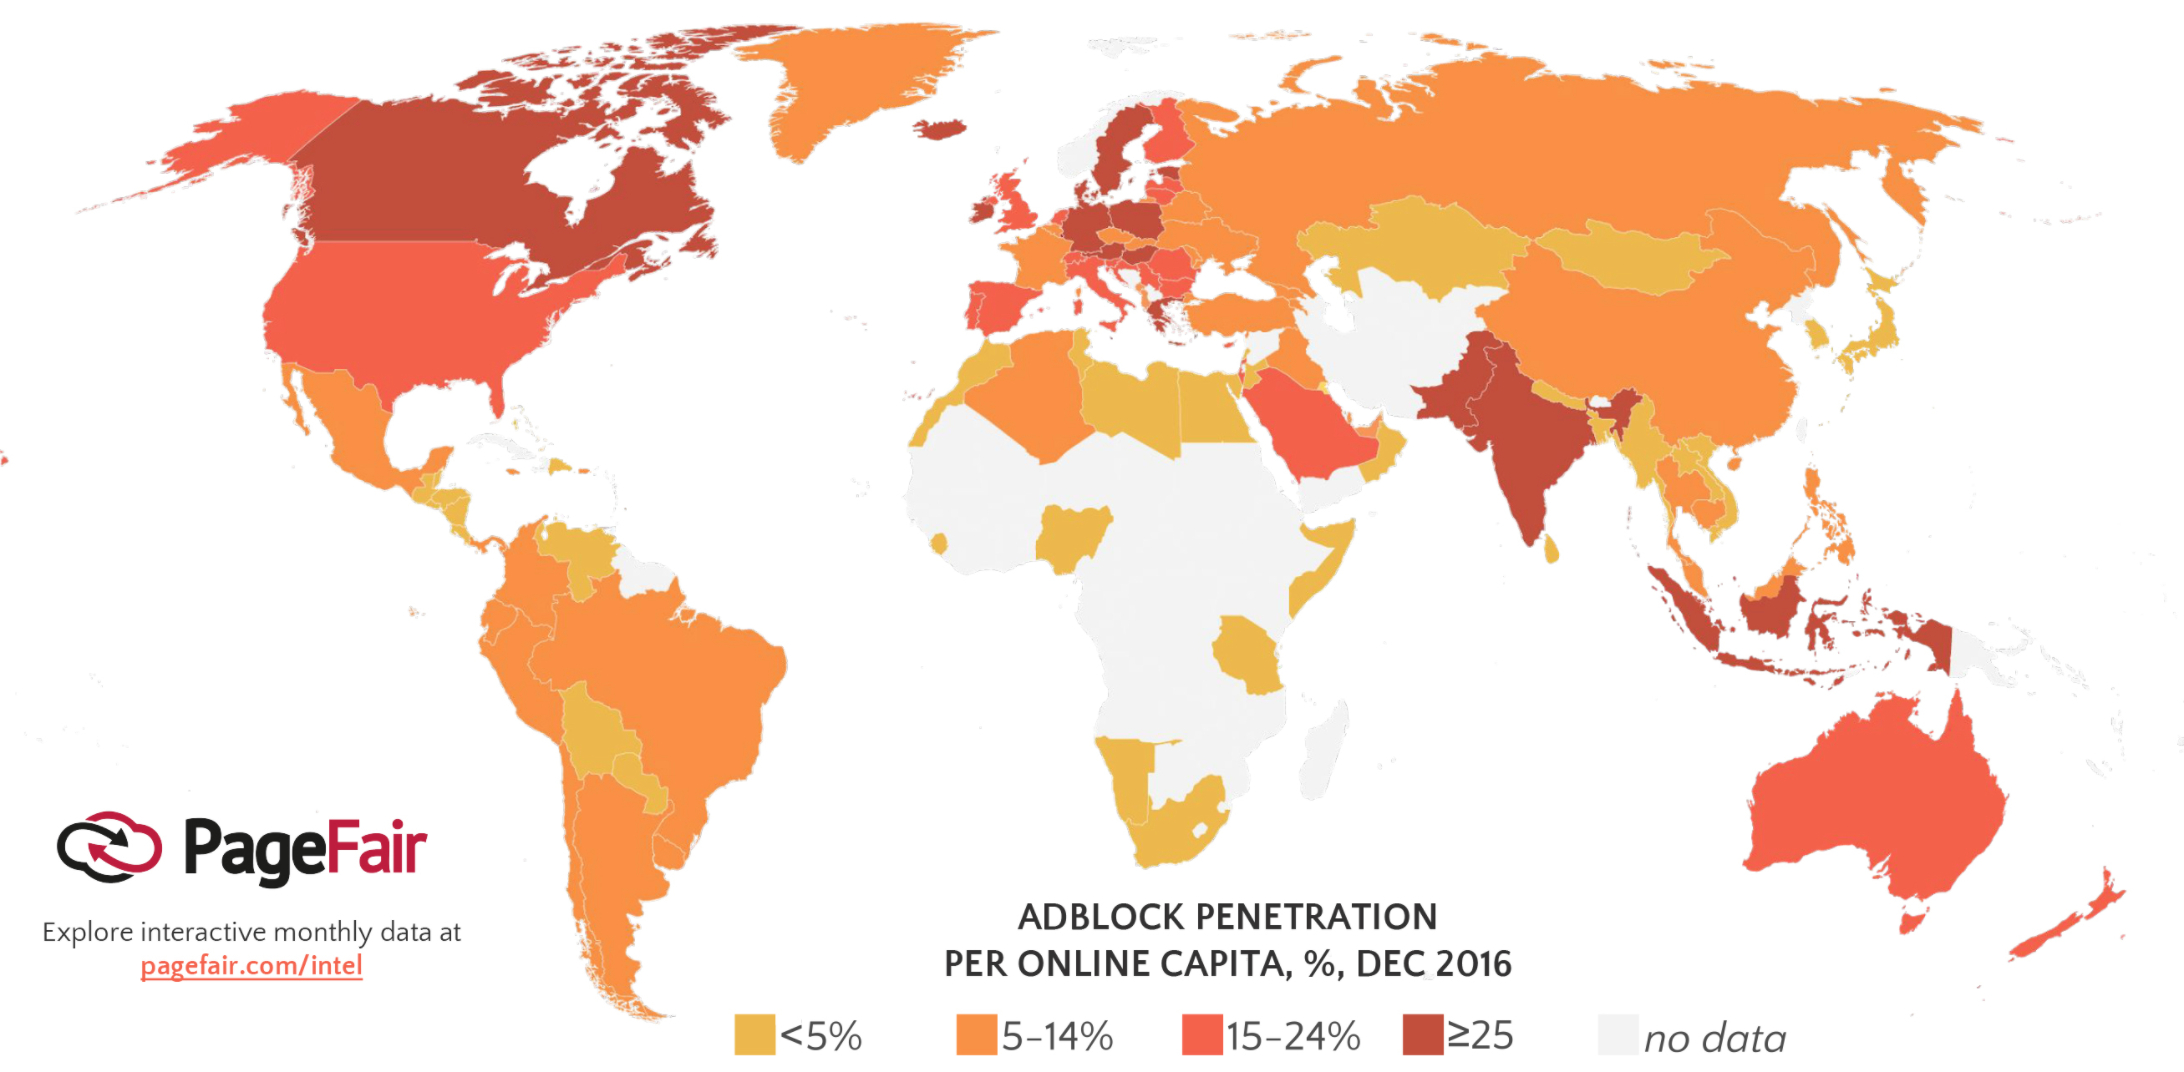 global map showing the use of ad blockers